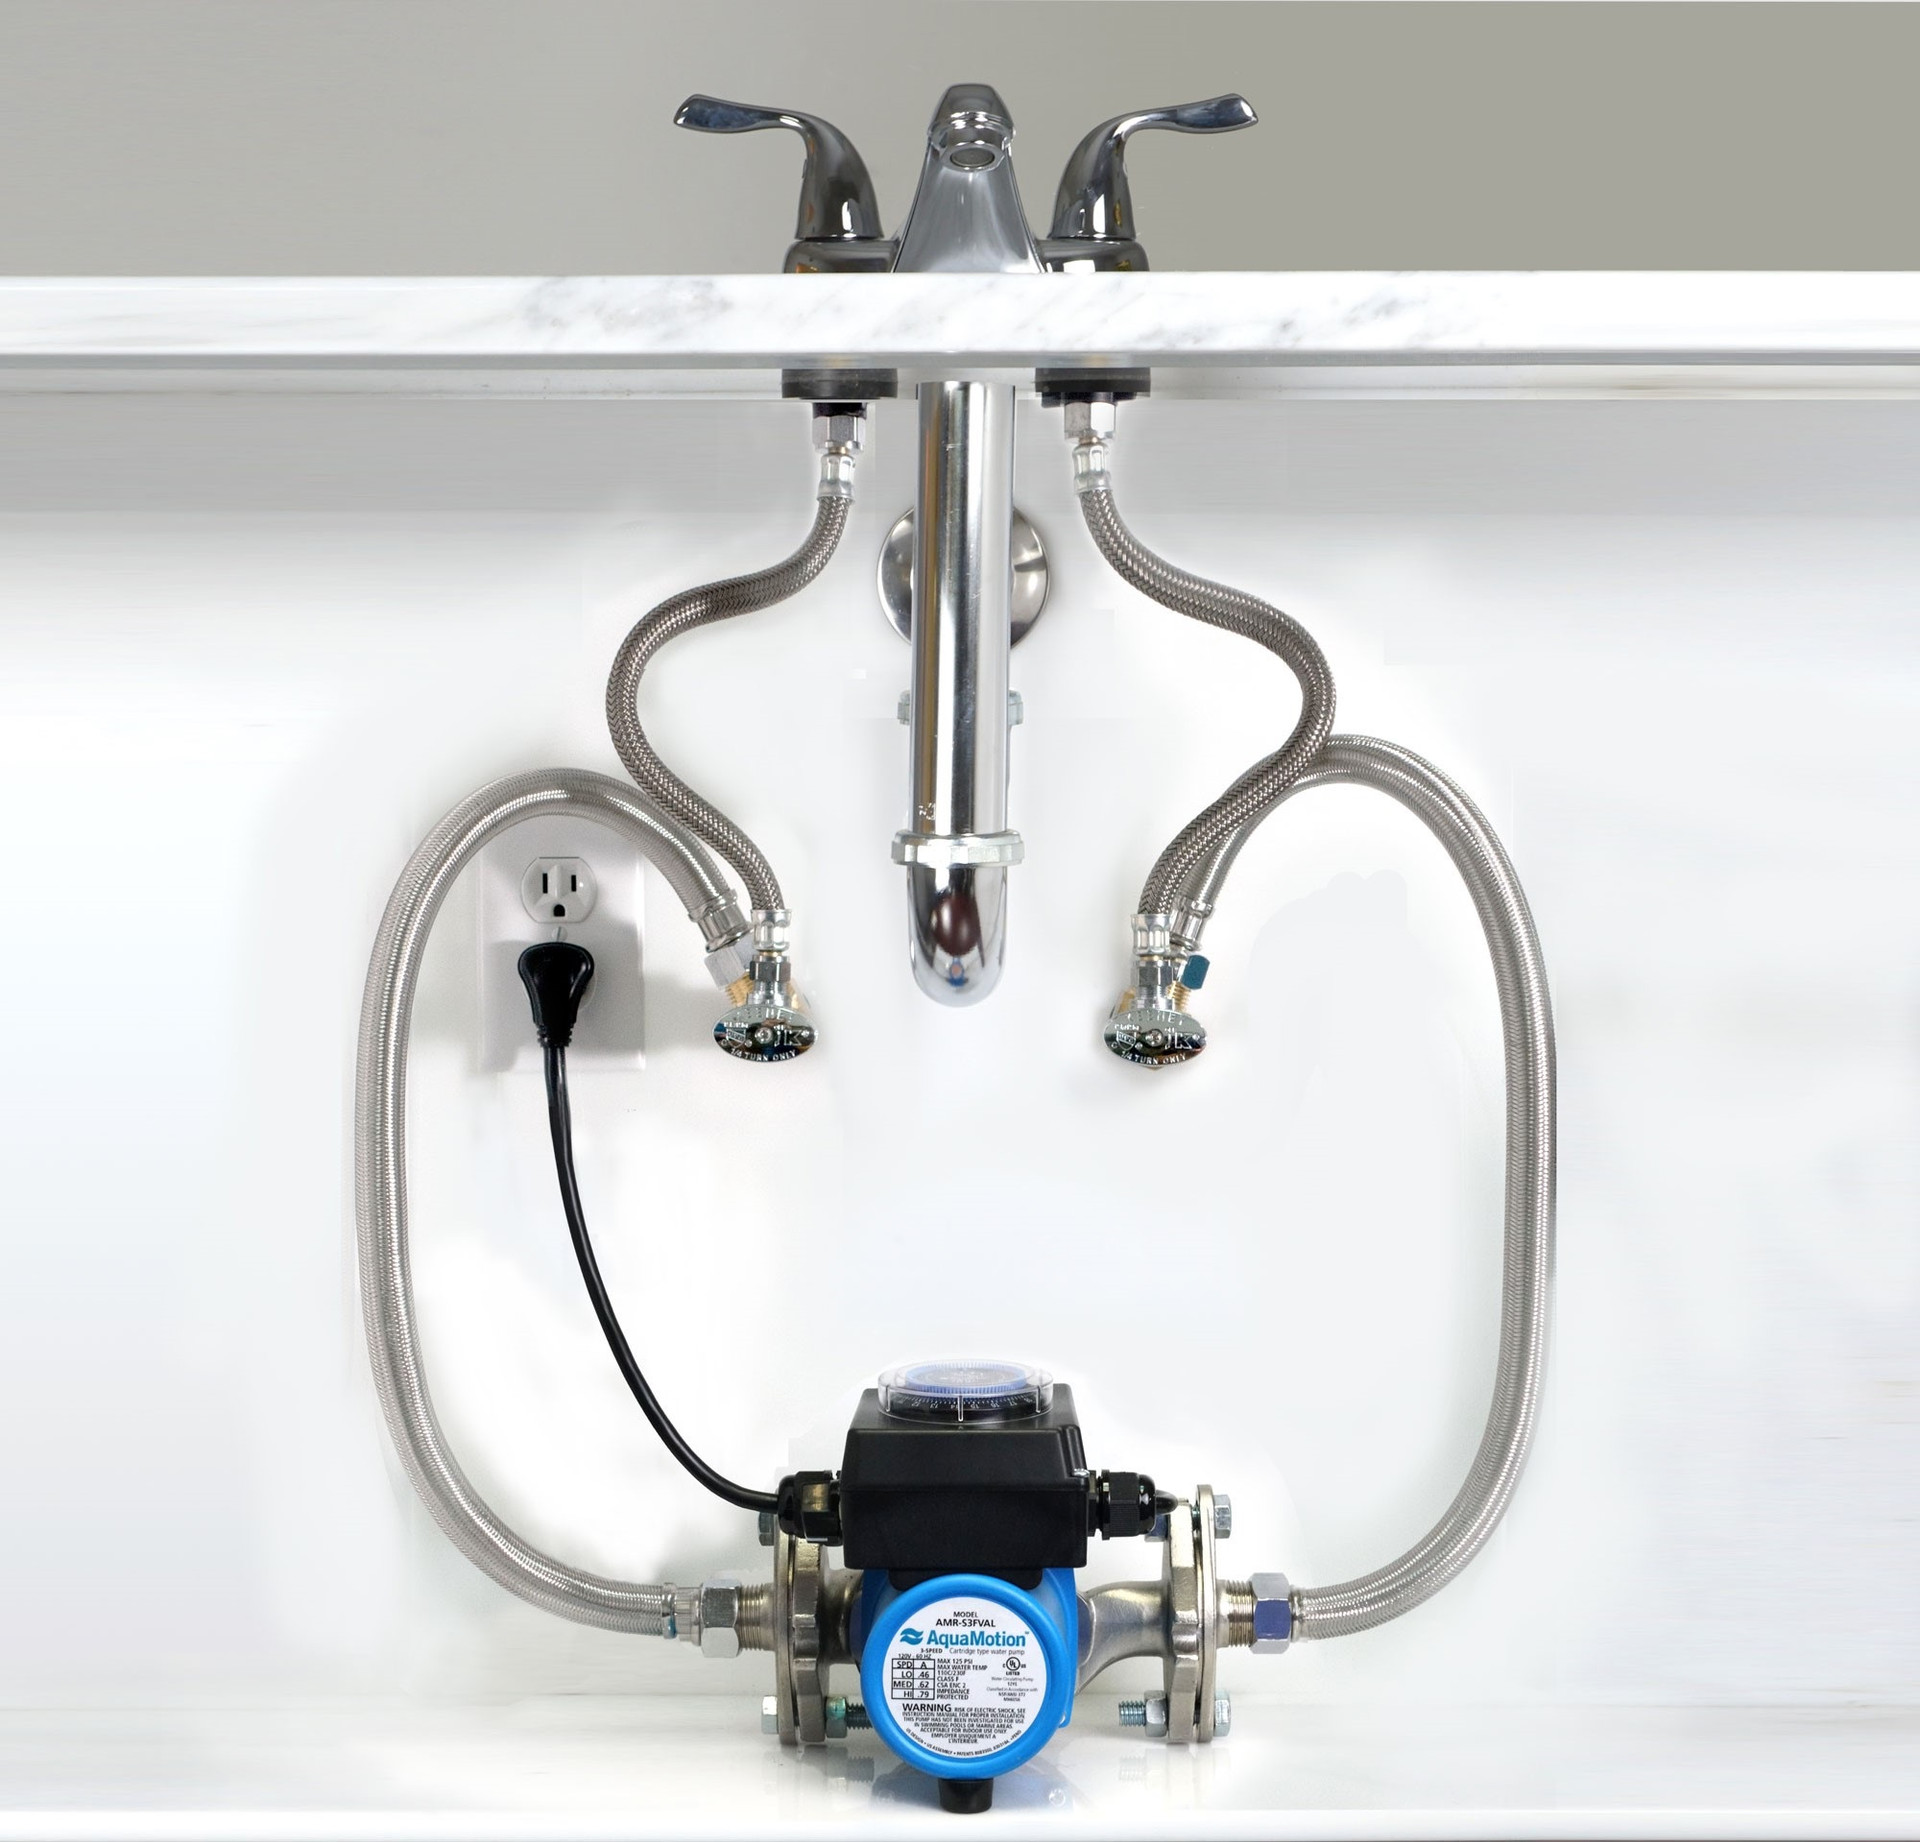 Aquamotion Amh3k R 3 Speed Hot Water Recirculation Pump For Under Sink